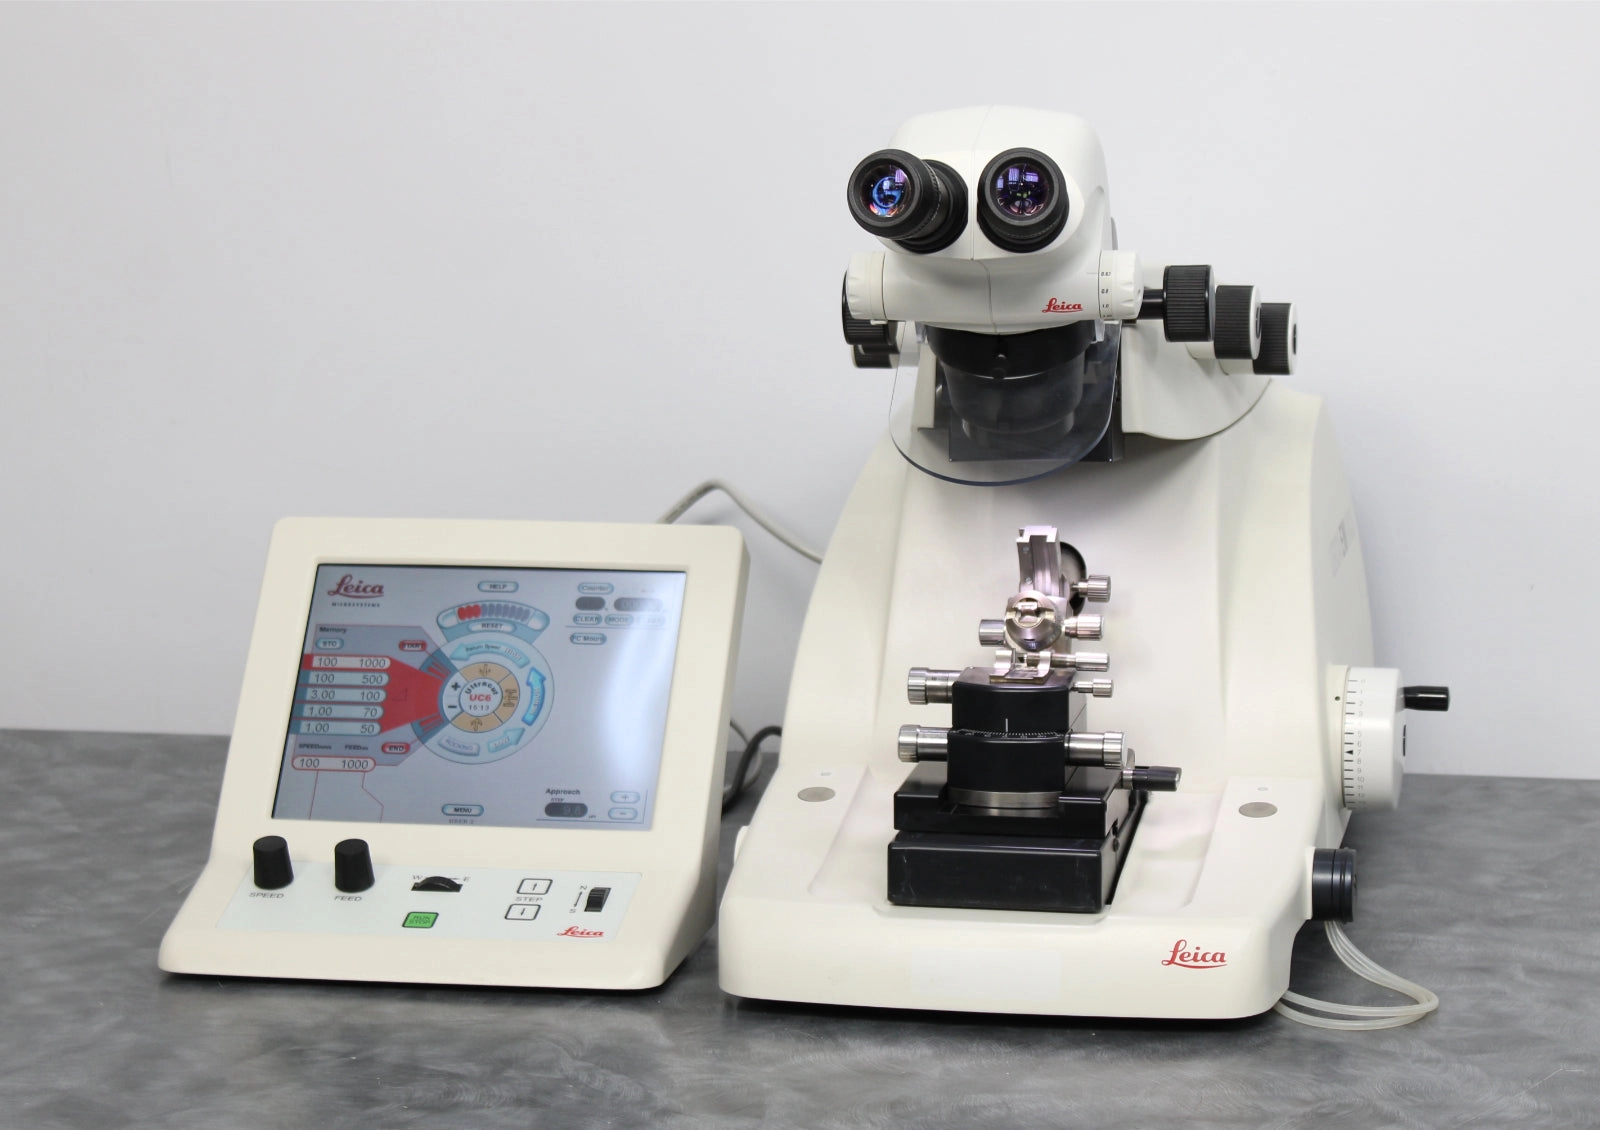 Leica EM UC6 Ultramicrotome Ultrathin Sectioning 705802 w/ Control Panel 655825